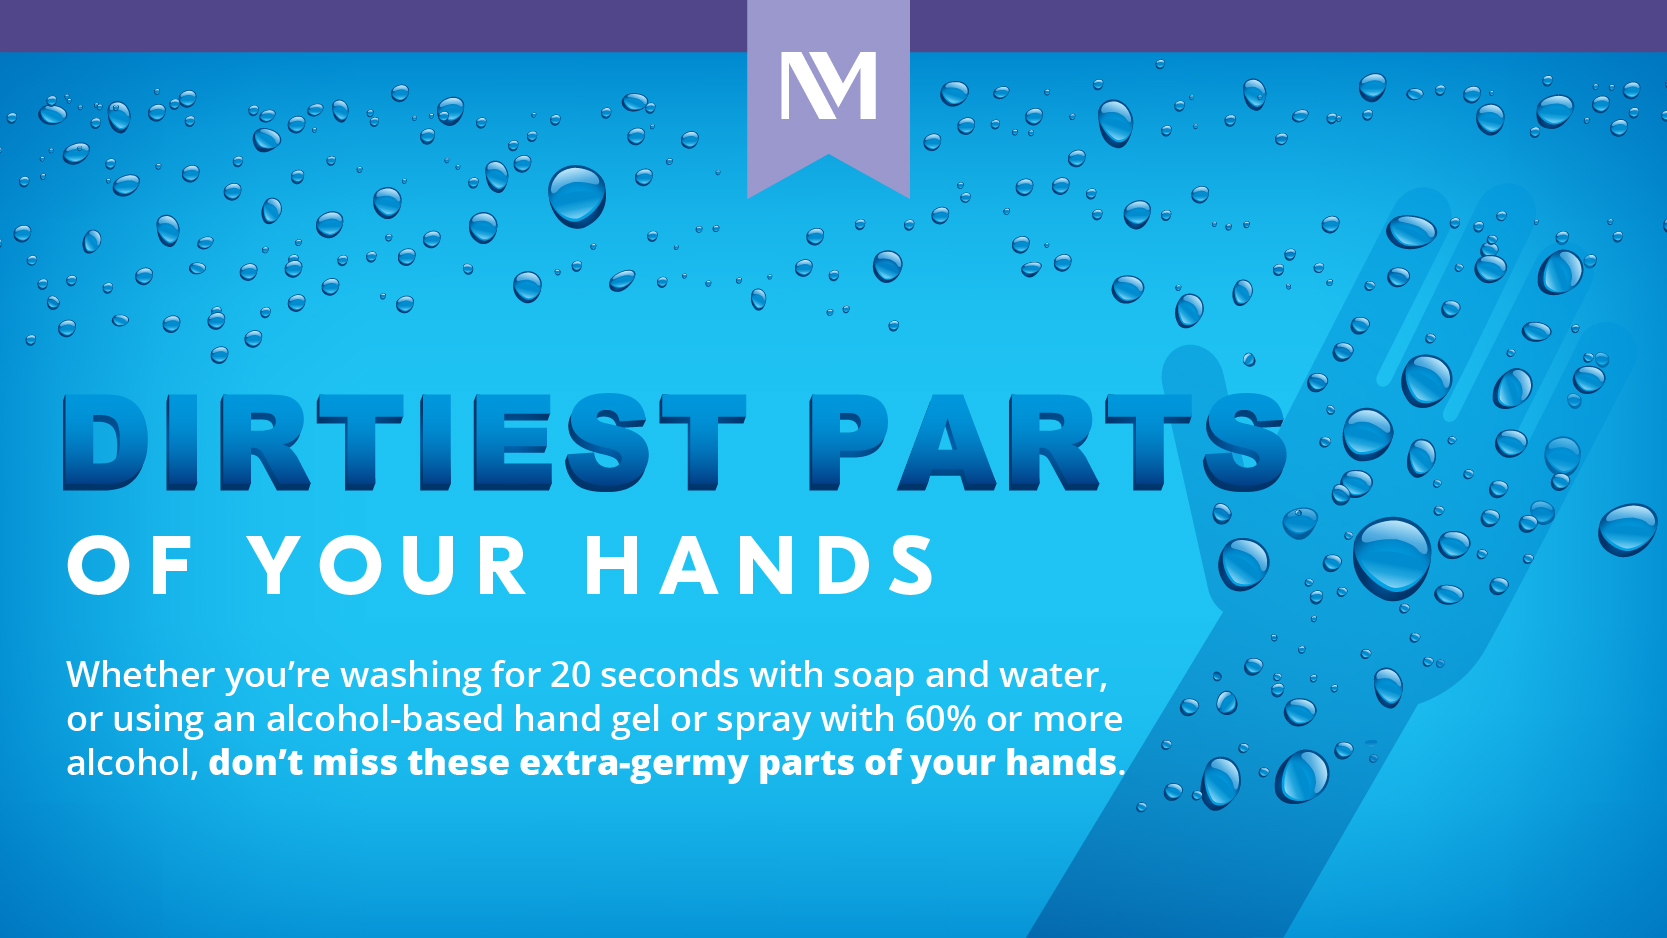 Blue background with copy that says "Dirtiest parts of your hands"